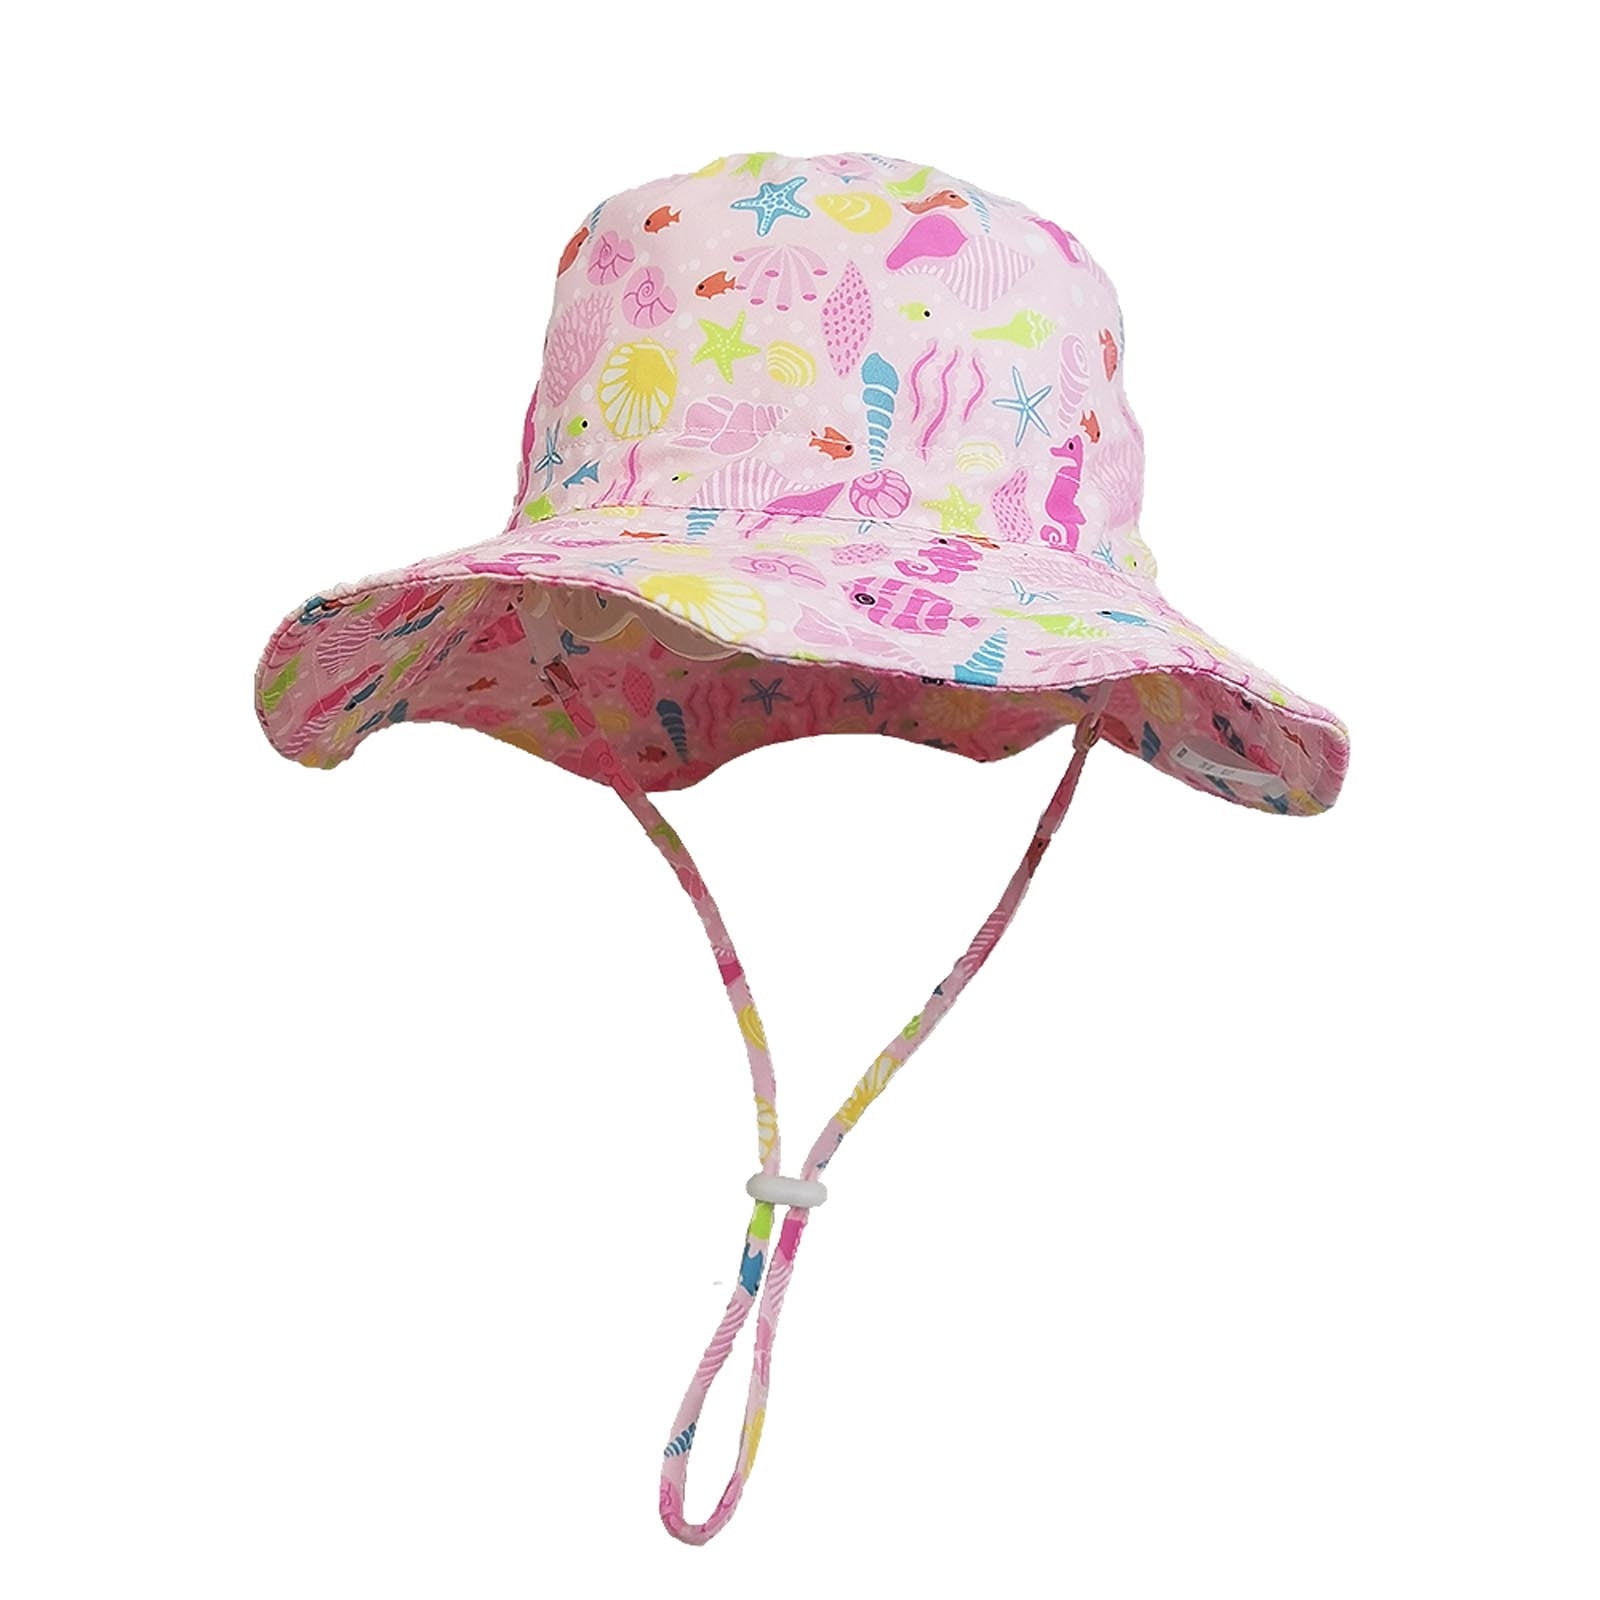 Teens Women and Men with Customize Top Packable Fisherman Cap for Outdoor Travel Pink Flamingo Ice Cream Summer New Summer Unisex Cotton Fashion Fishing Sun Bucket Hats for Kid